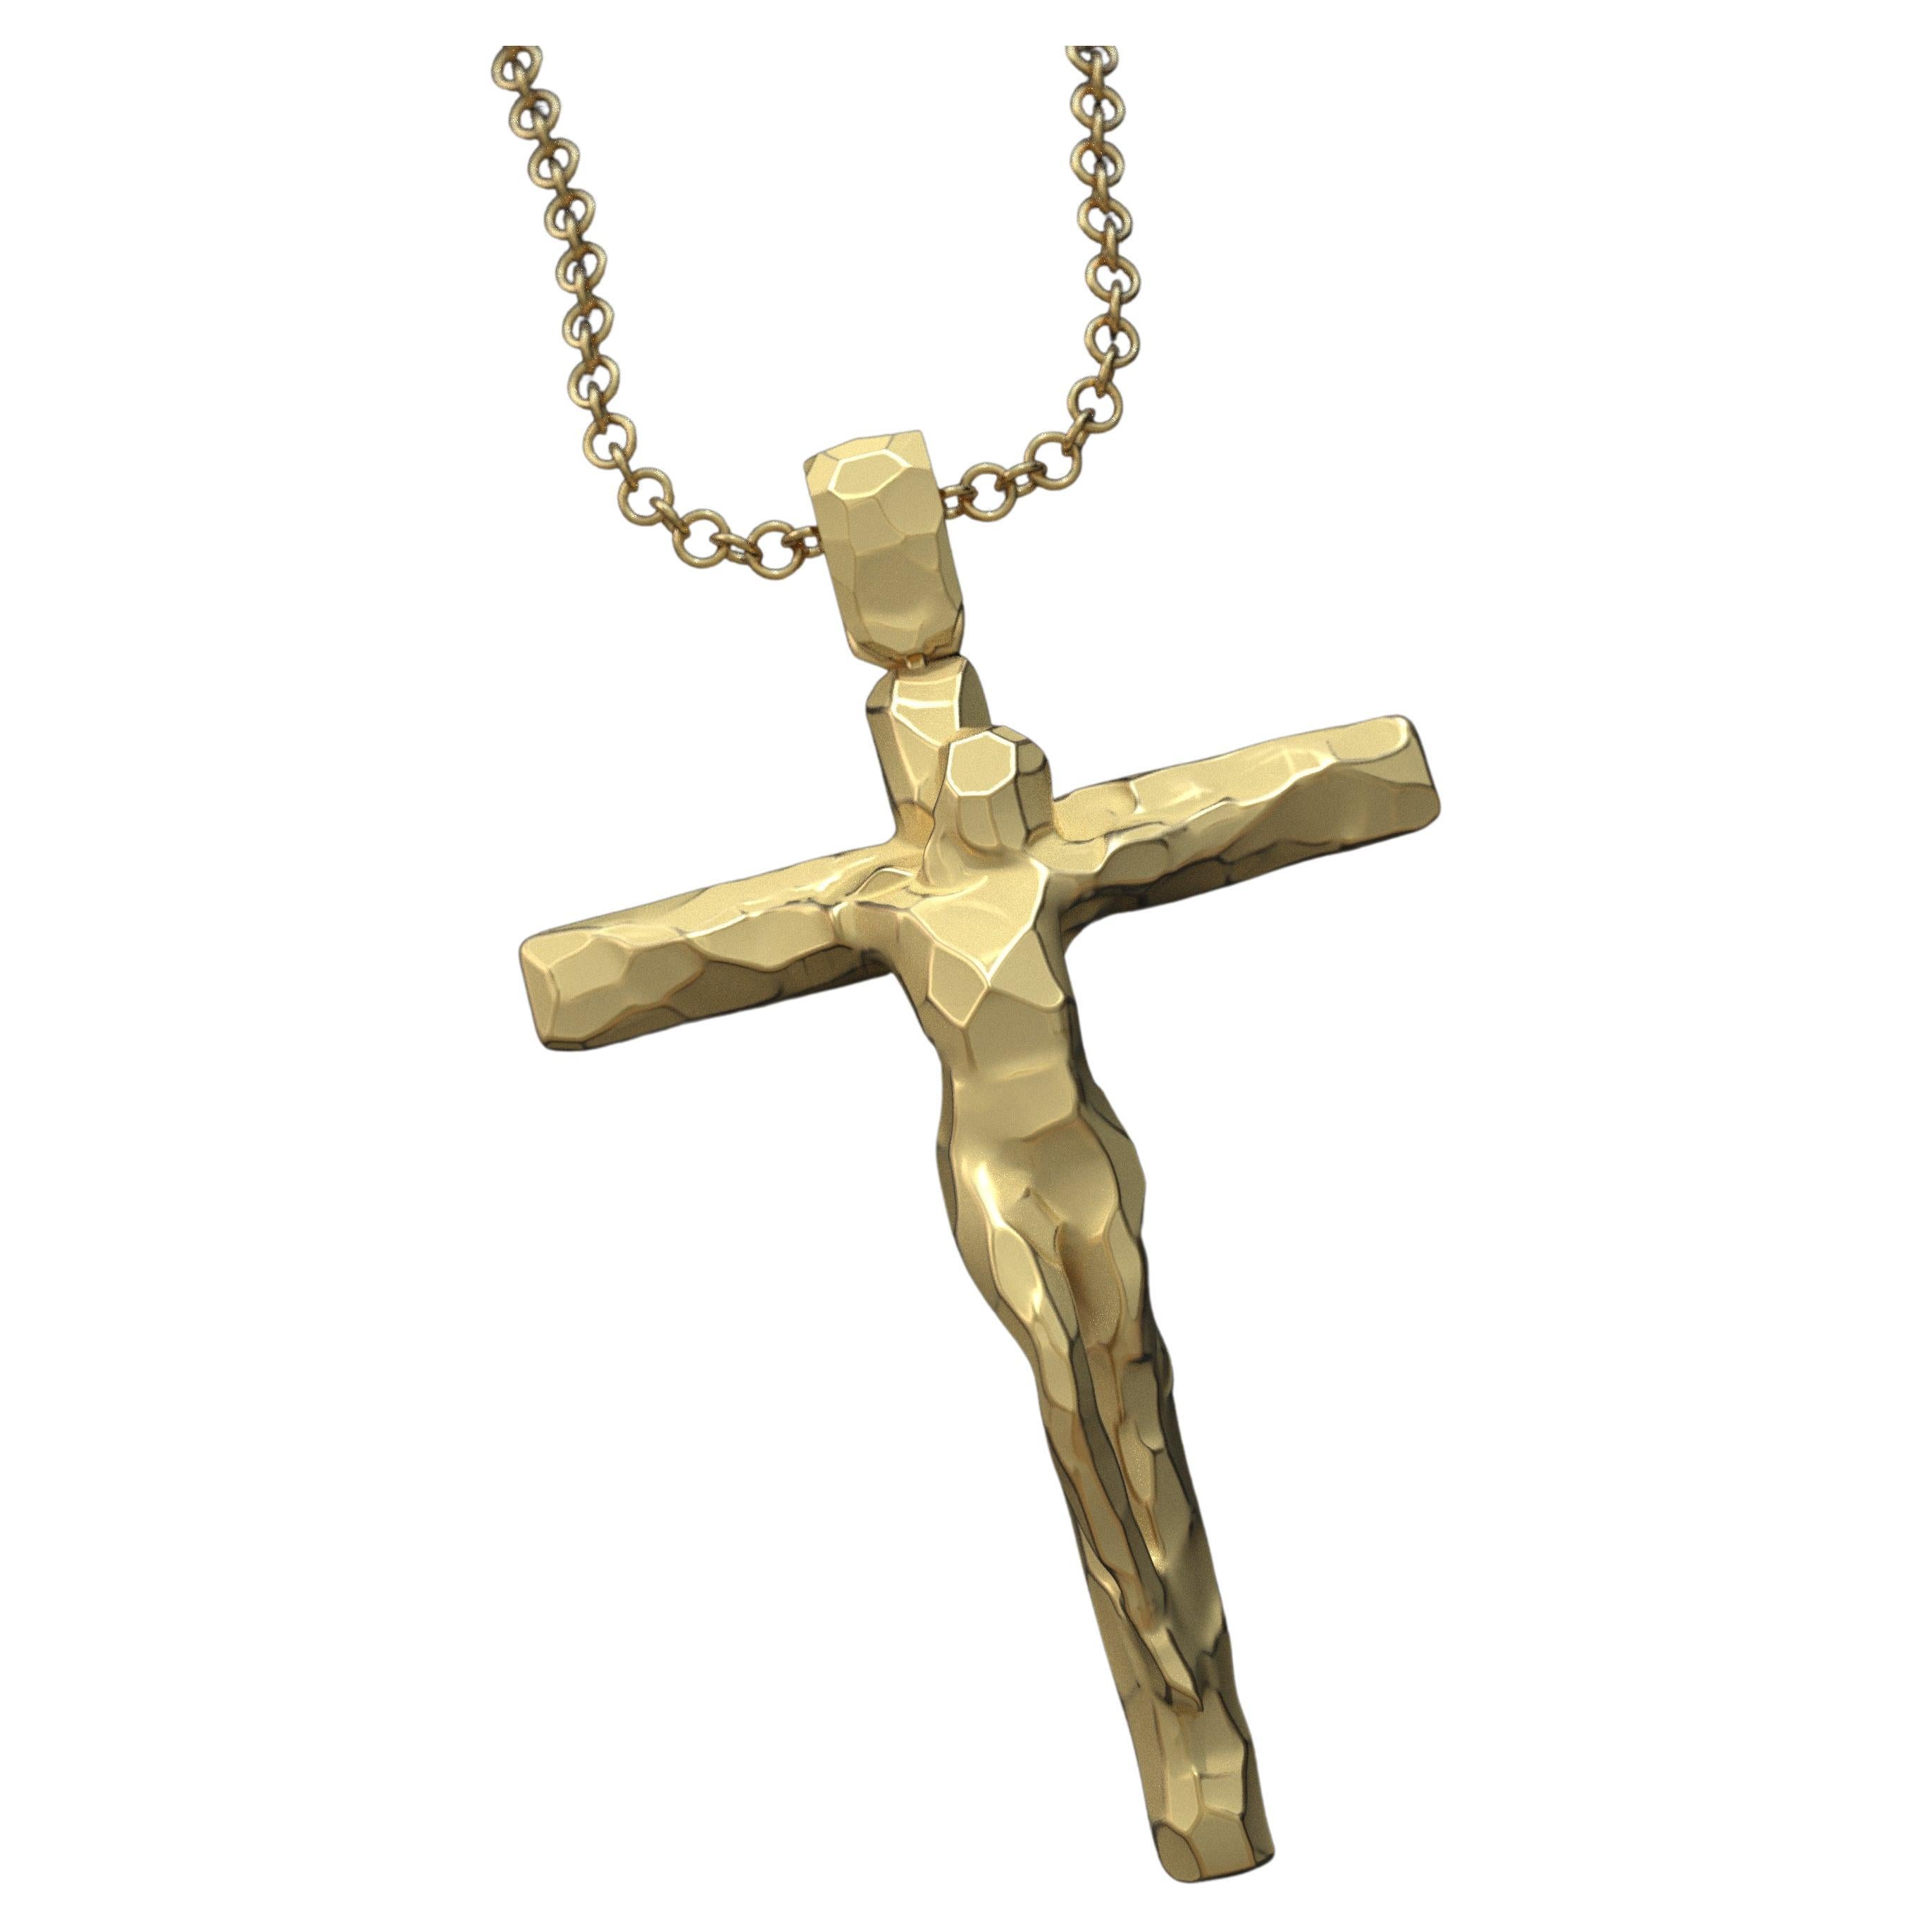 Gold cross with a chain ☆ zlotychlopak.pl ☆ Gold stamp 585 333 Low price!